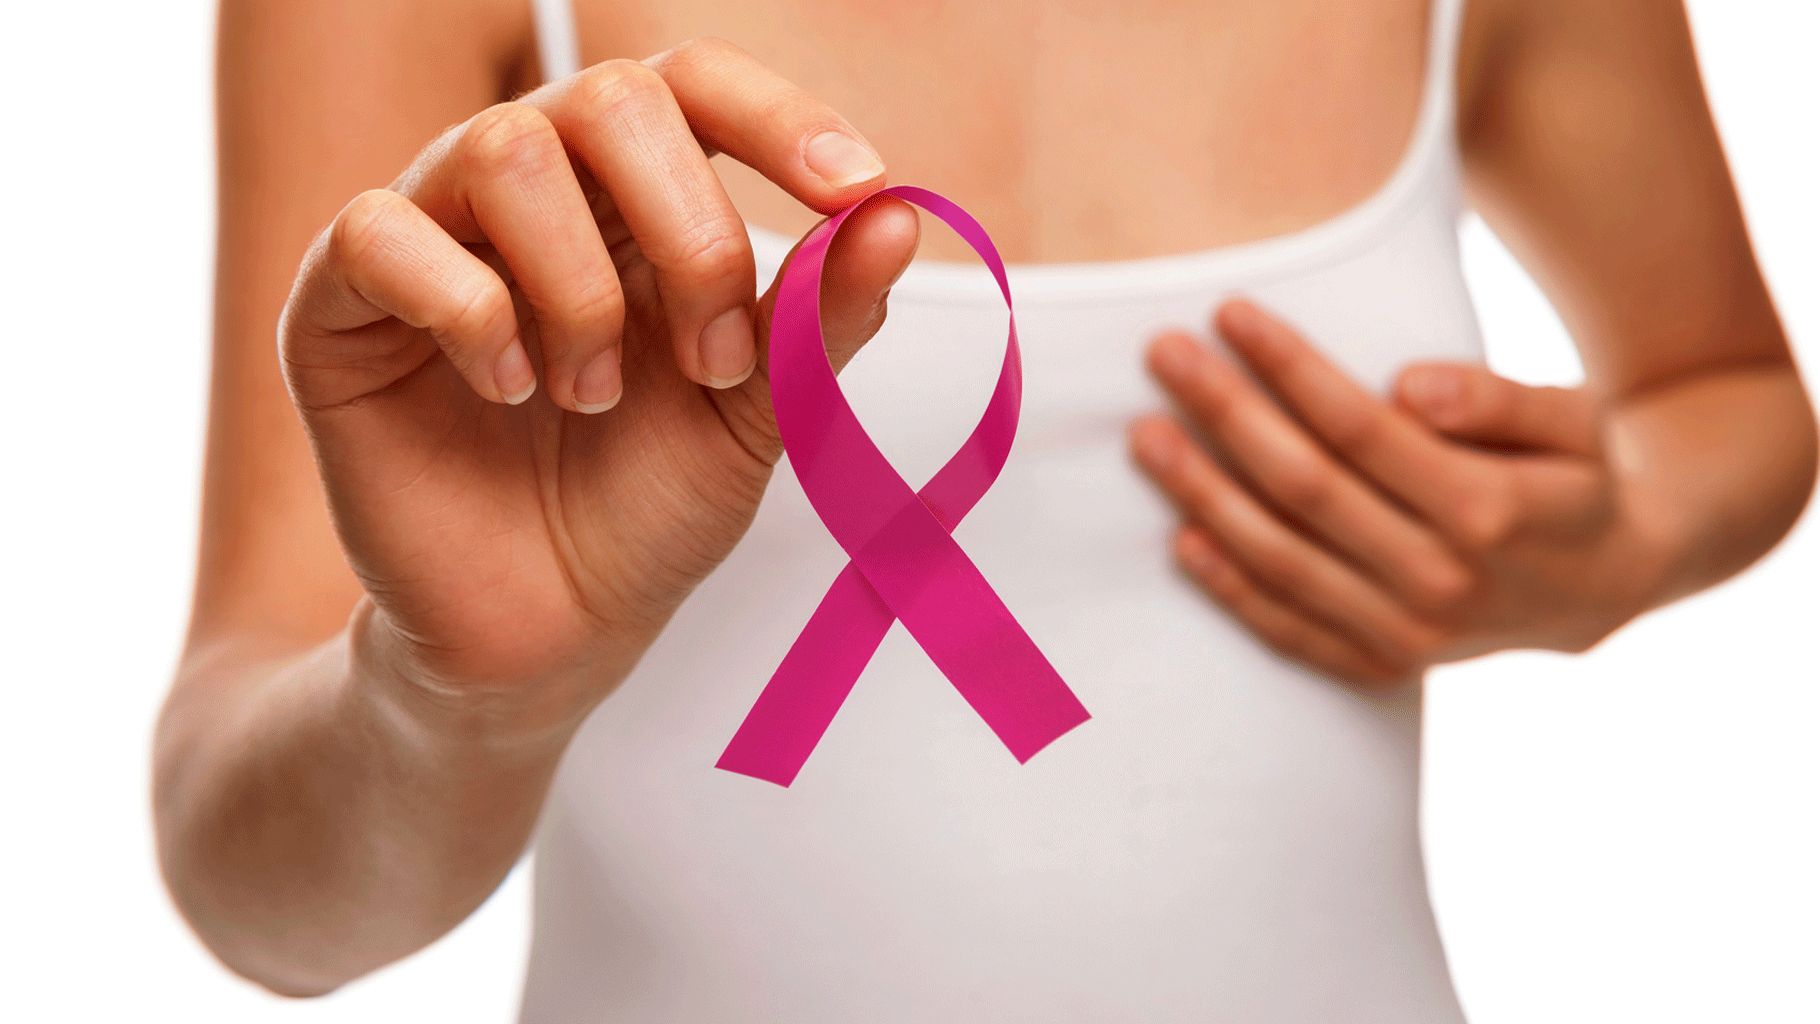 Genetic testing could reveal mutation which make women more susceptible to breast and ovarian cancer.